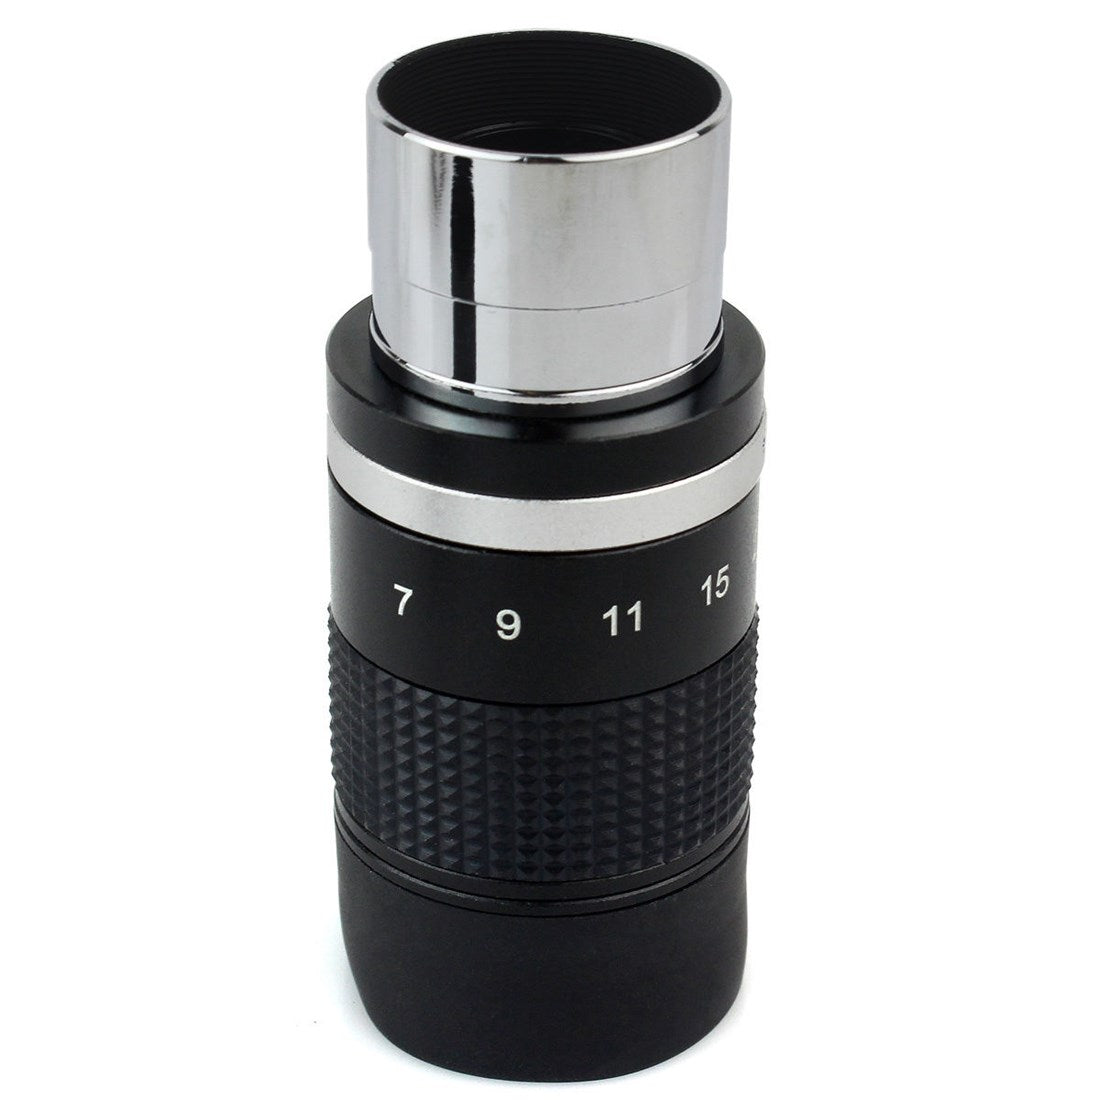 Product Image of Skywatcher 7-21mm Zoom Telescope Eyepiece 1.25 Fitting SKY20586